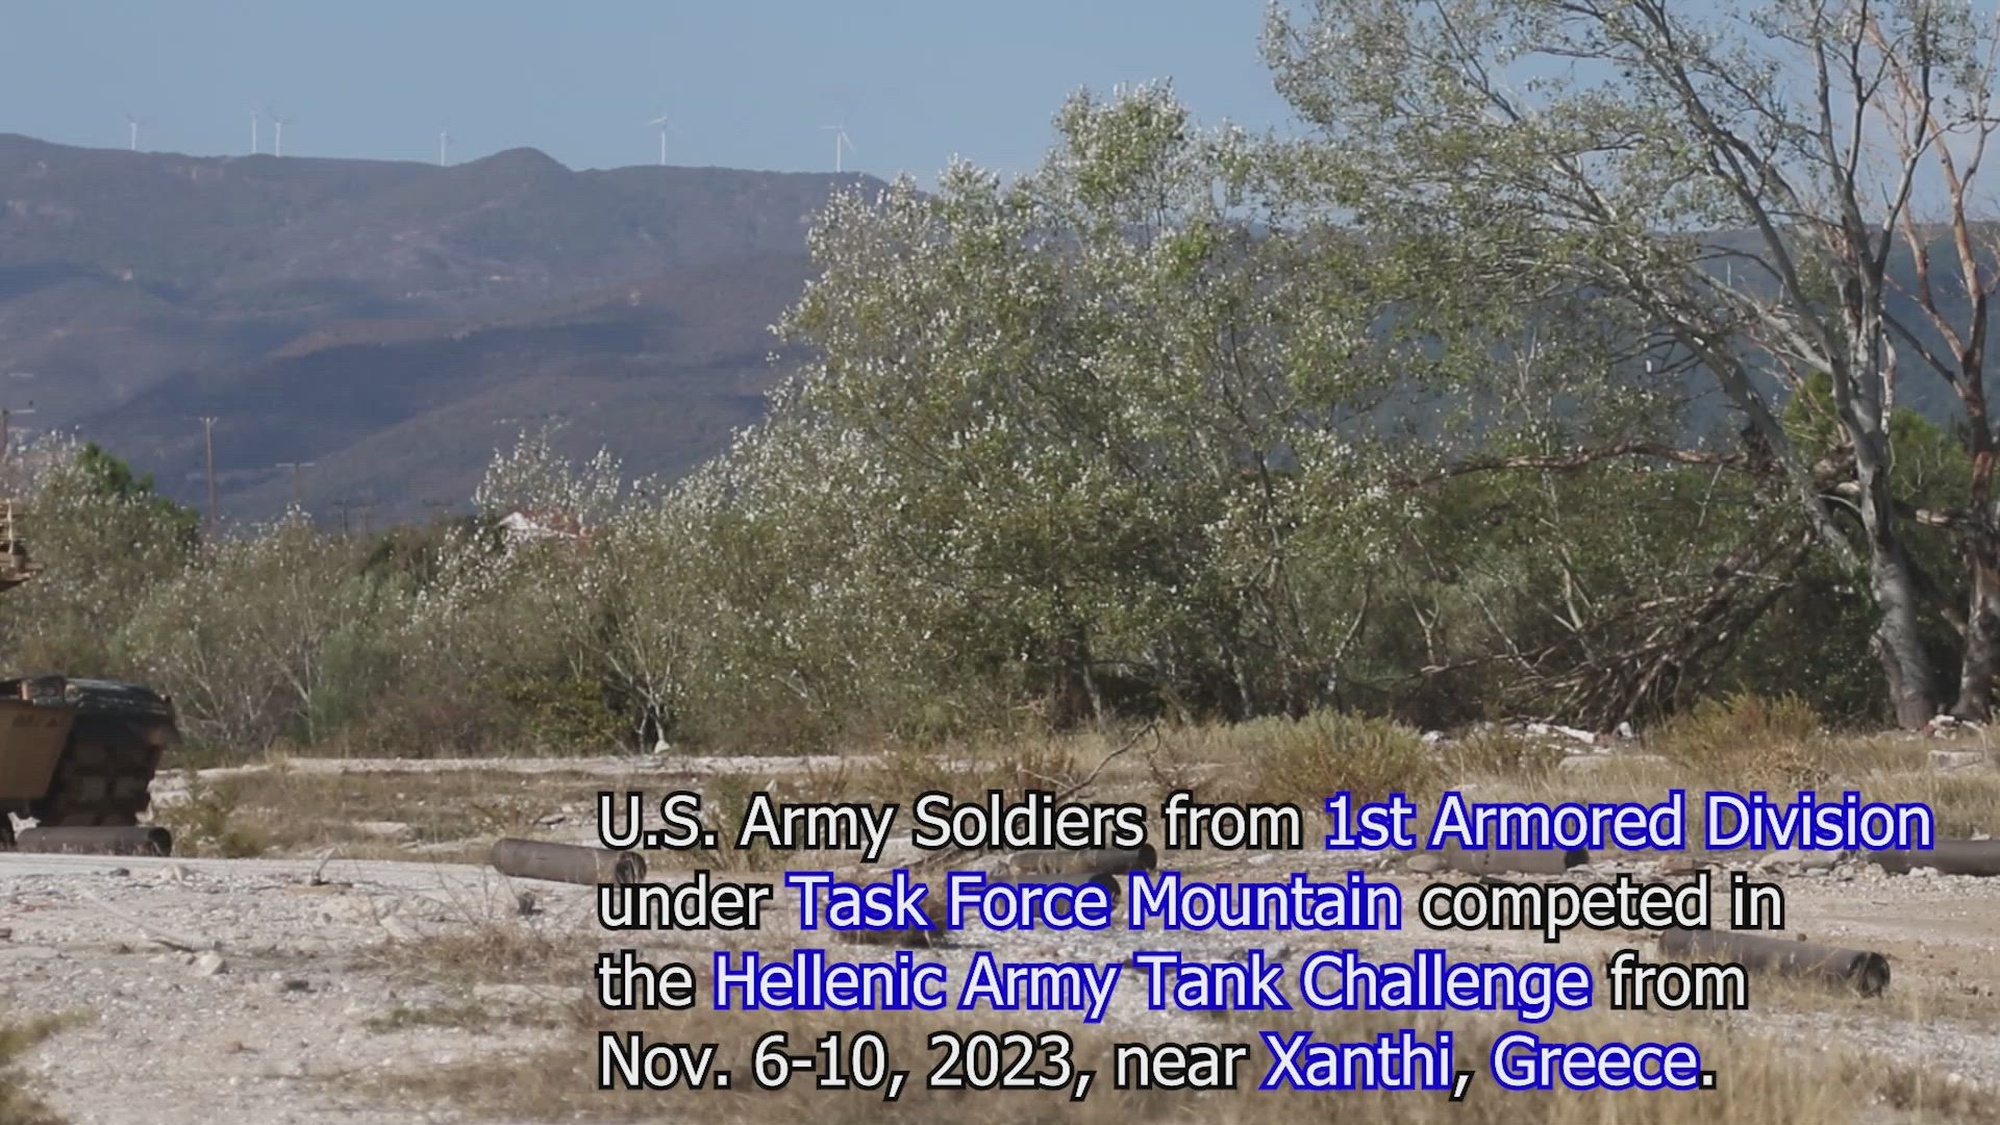 Soldiers with the 1st Battalion, 6th Infantry Regiment, 2nd Brigade Combat Team, 1st Armored Division compete in the Hellenic Army Tank Challenge, Nov. 6-10, 2023, near Xanthi, Greece. The competition serves to enhance the lethality of U.S. forces while strengthening bonds and interoperability with NATO allies. (U.S. Army photo by Spc. Kade M. Bowers)